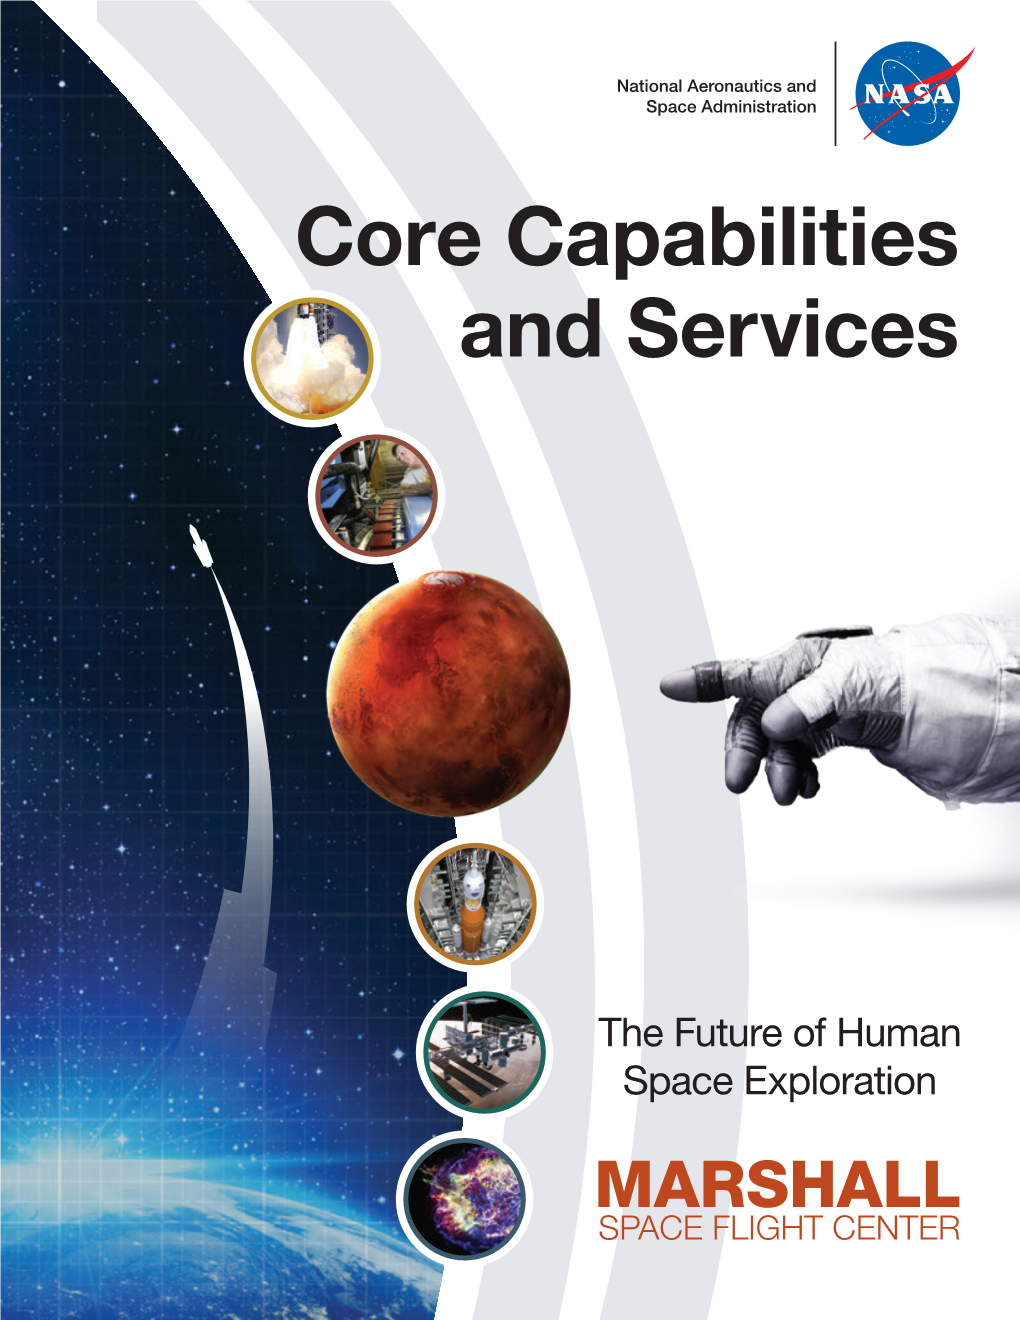 Marshall Core Capabilities and Services